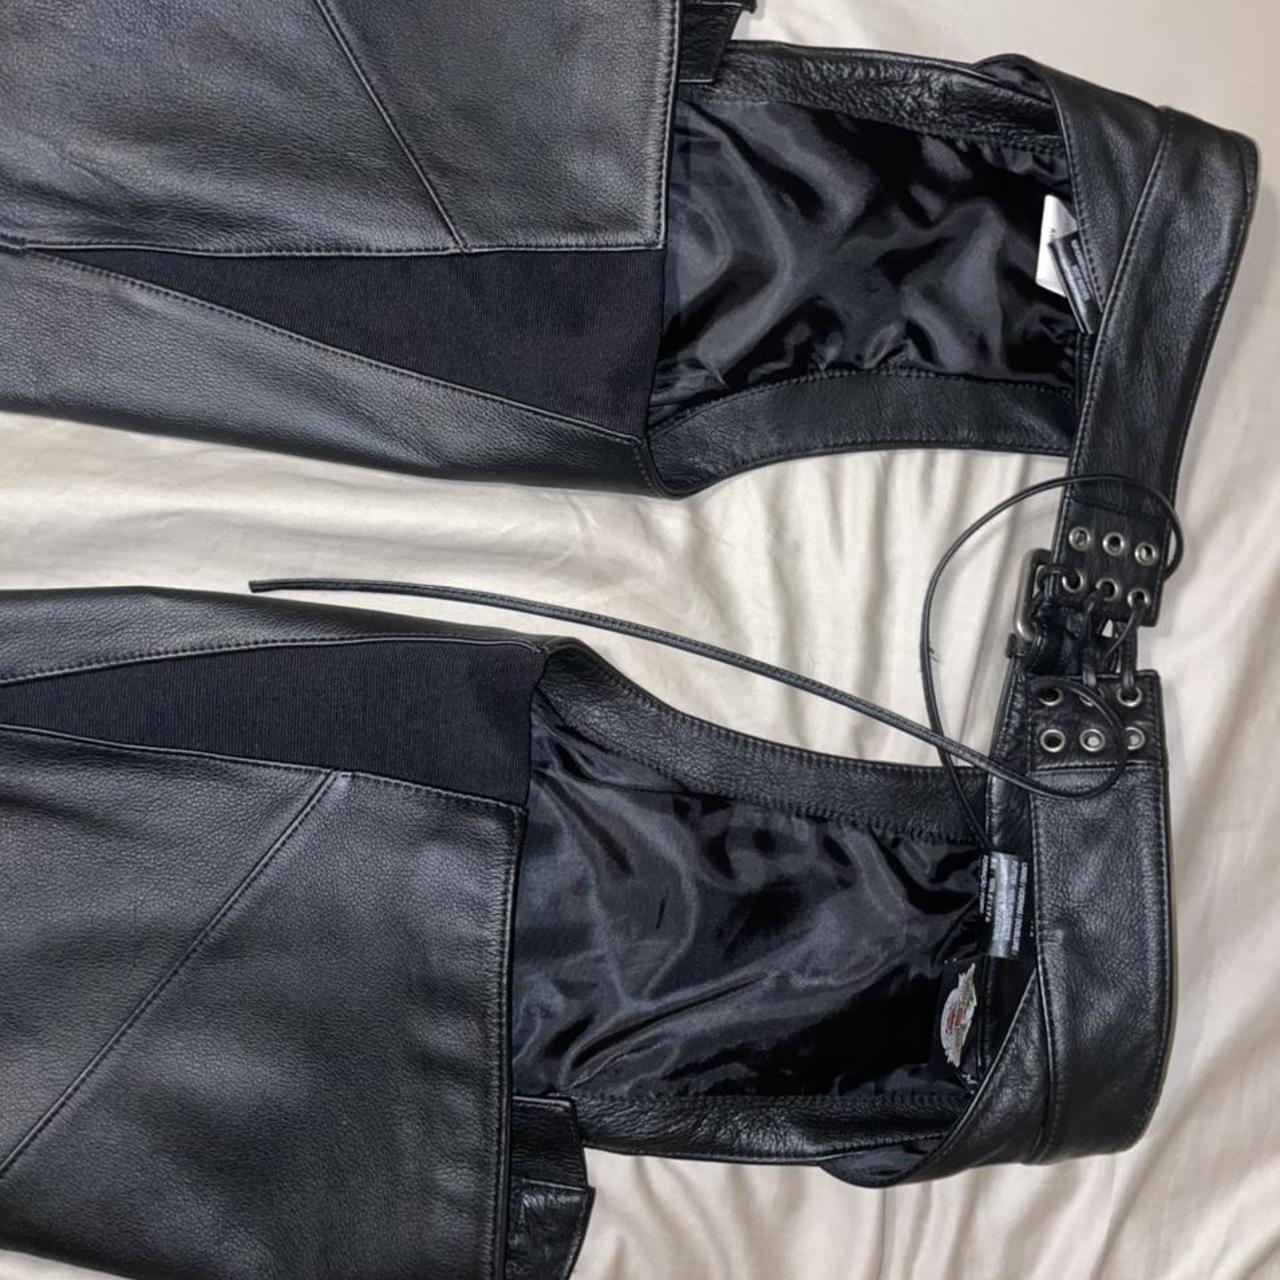 Harley Davidson womens assless chaps, Lightly used